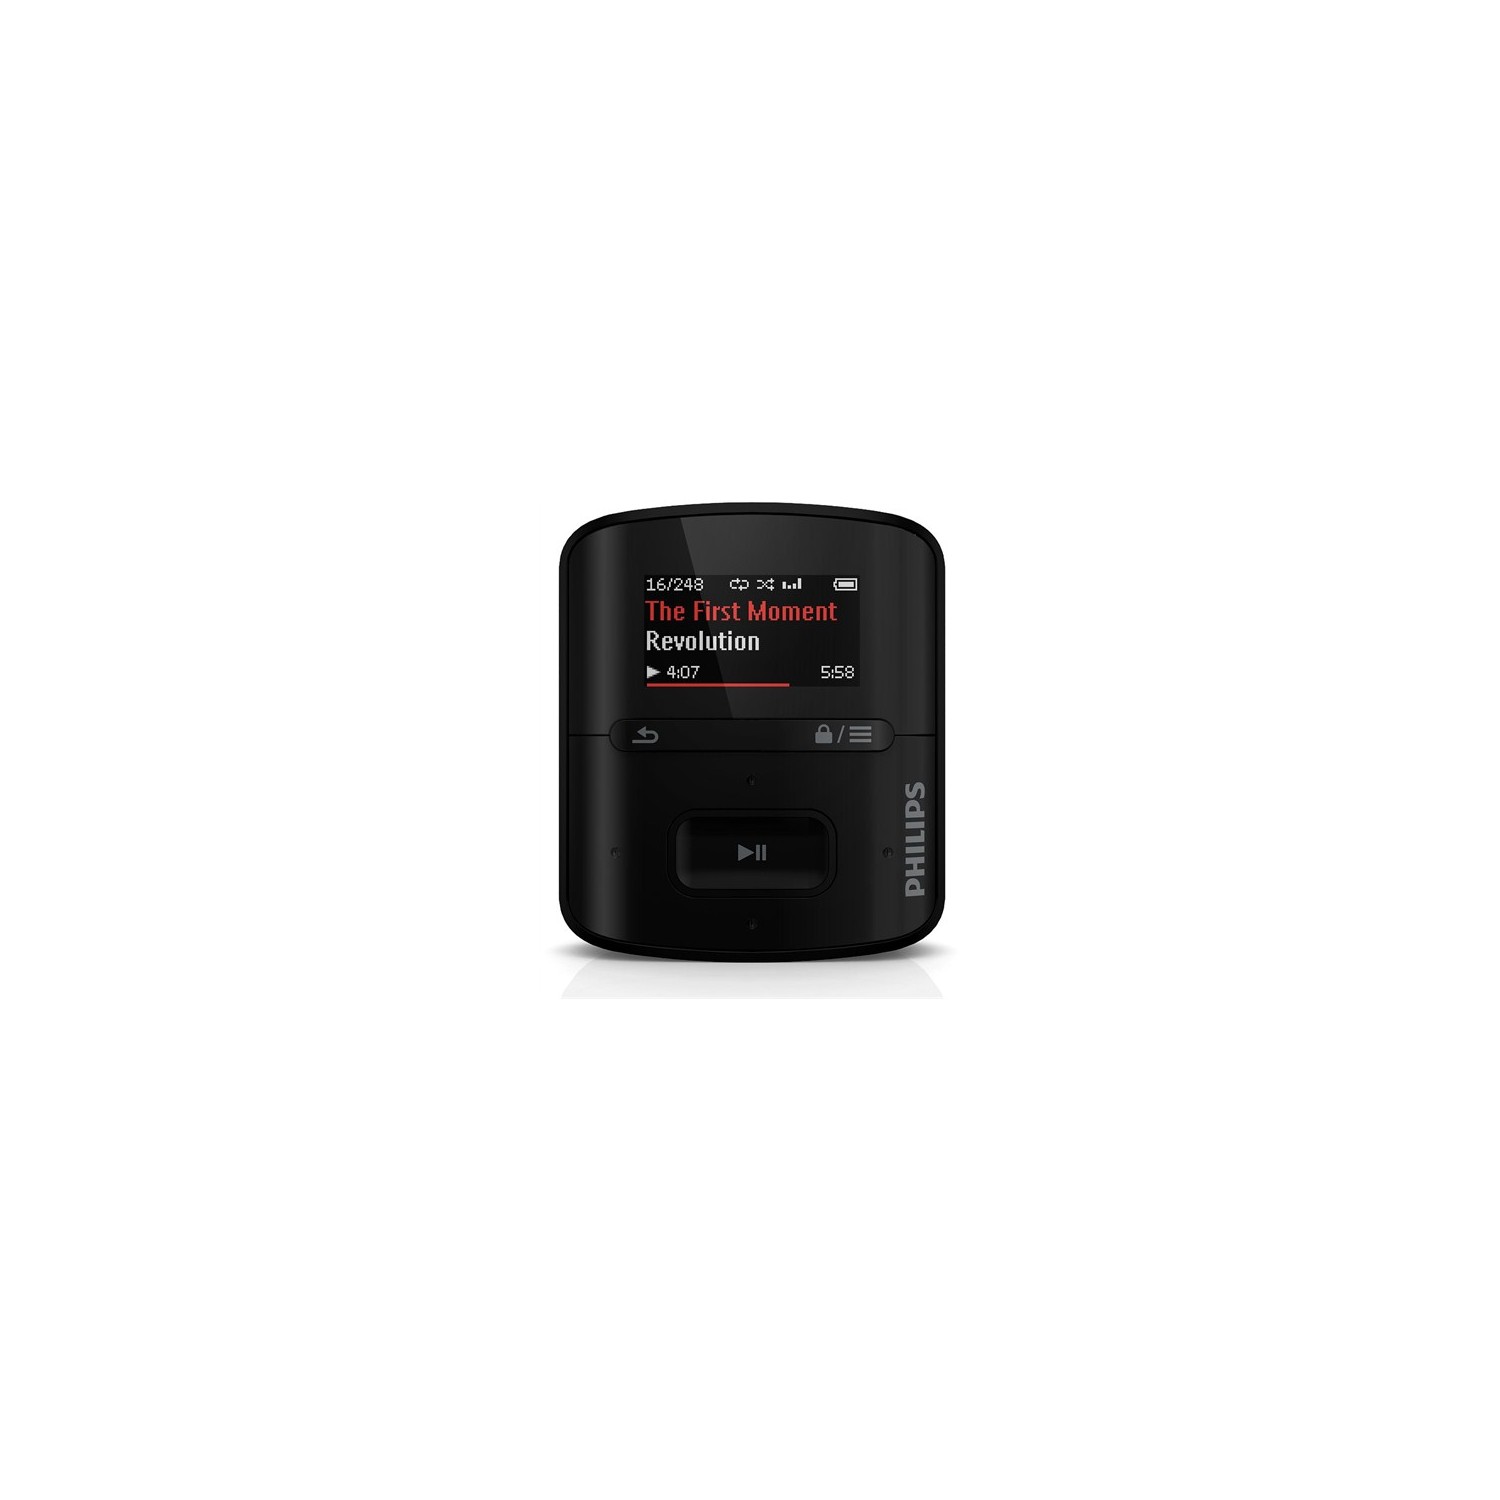 gogear mp3 player philips 2gb s/n nw 1a0746026522